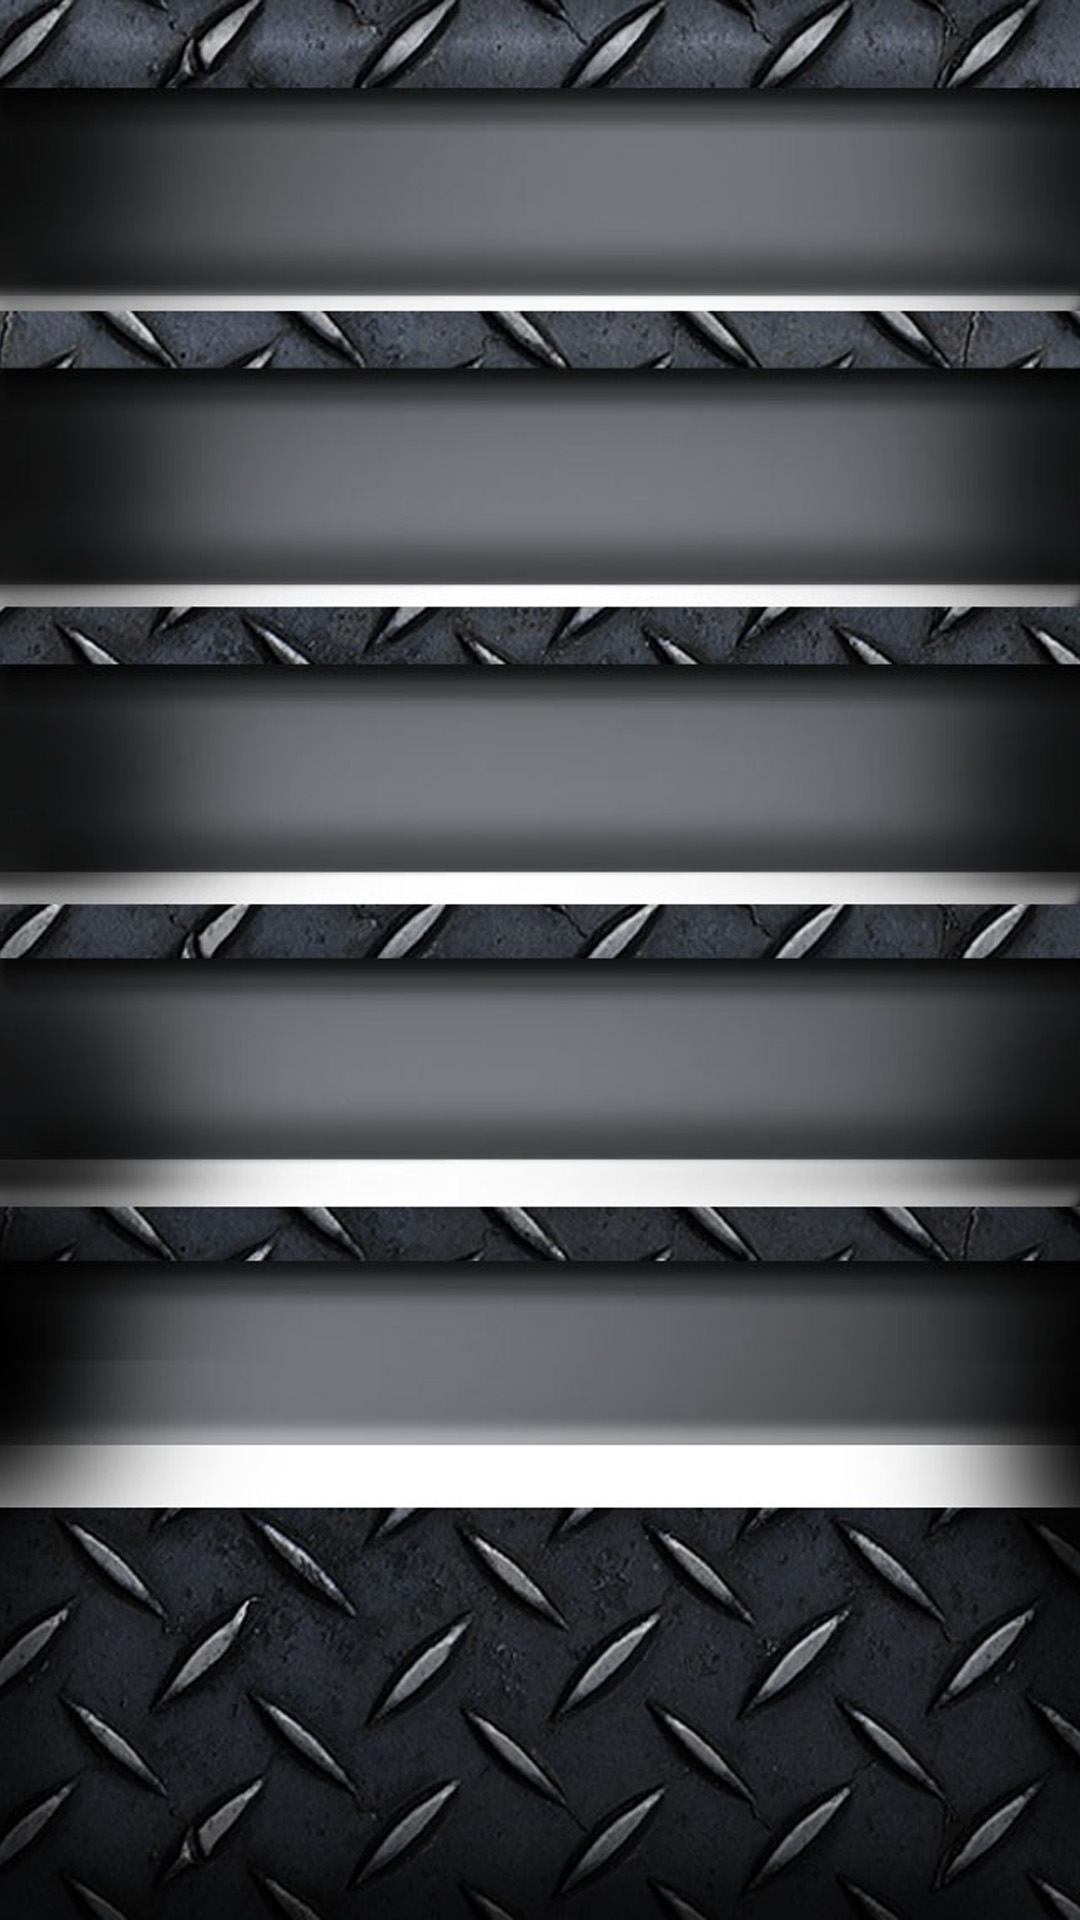 iPhone Shelf Wallpaper9 Car Pictures